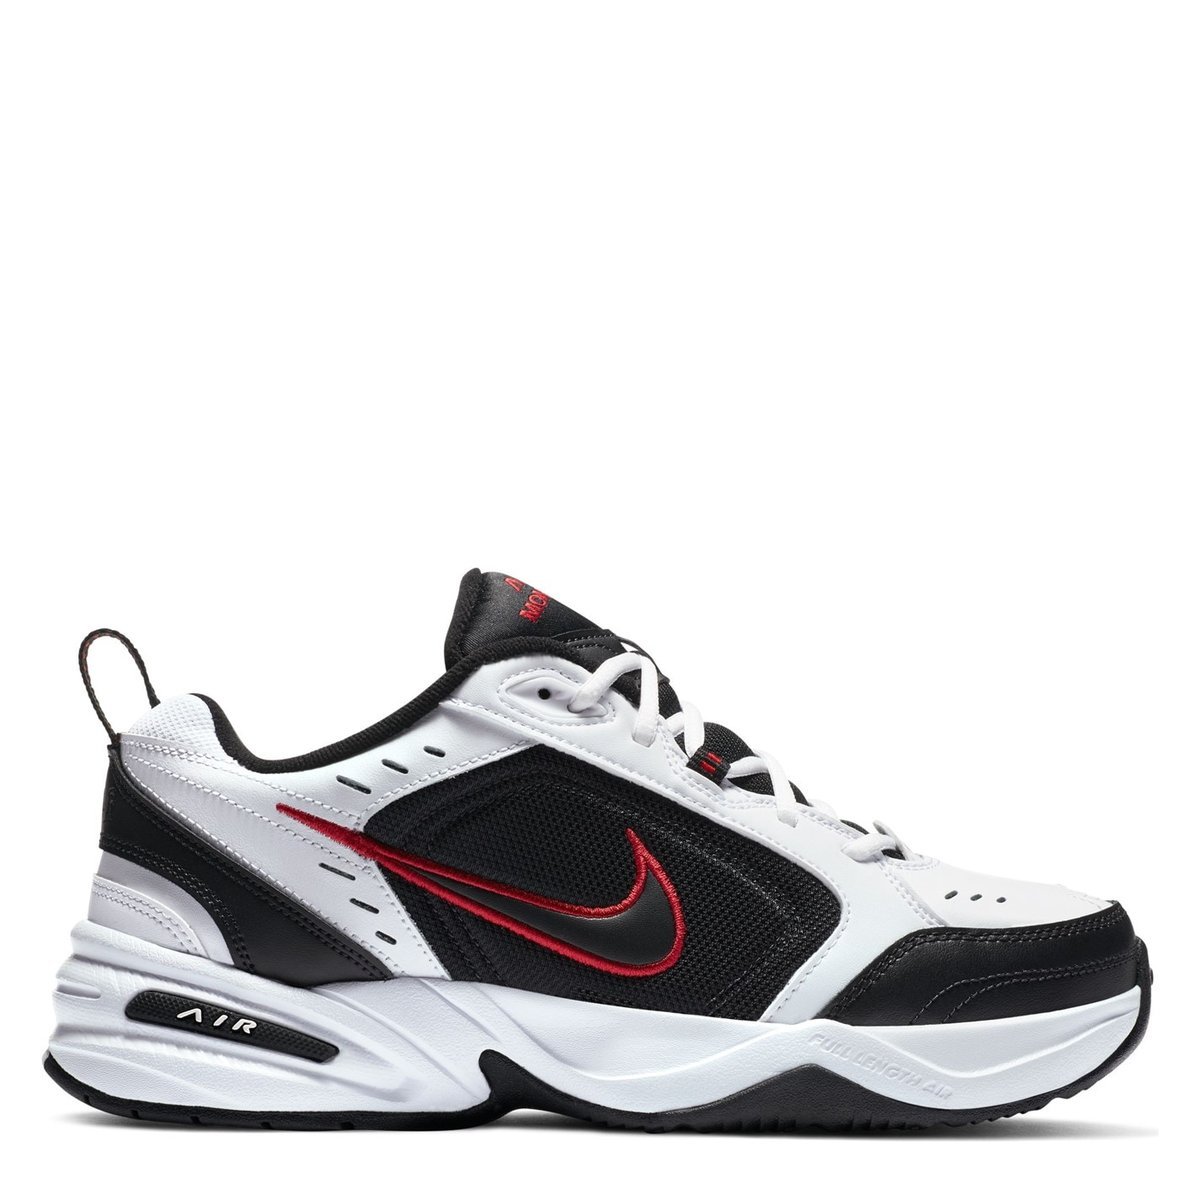 Size 12 Nike Nike Air Monarch IV Training Shoes Mens trainers